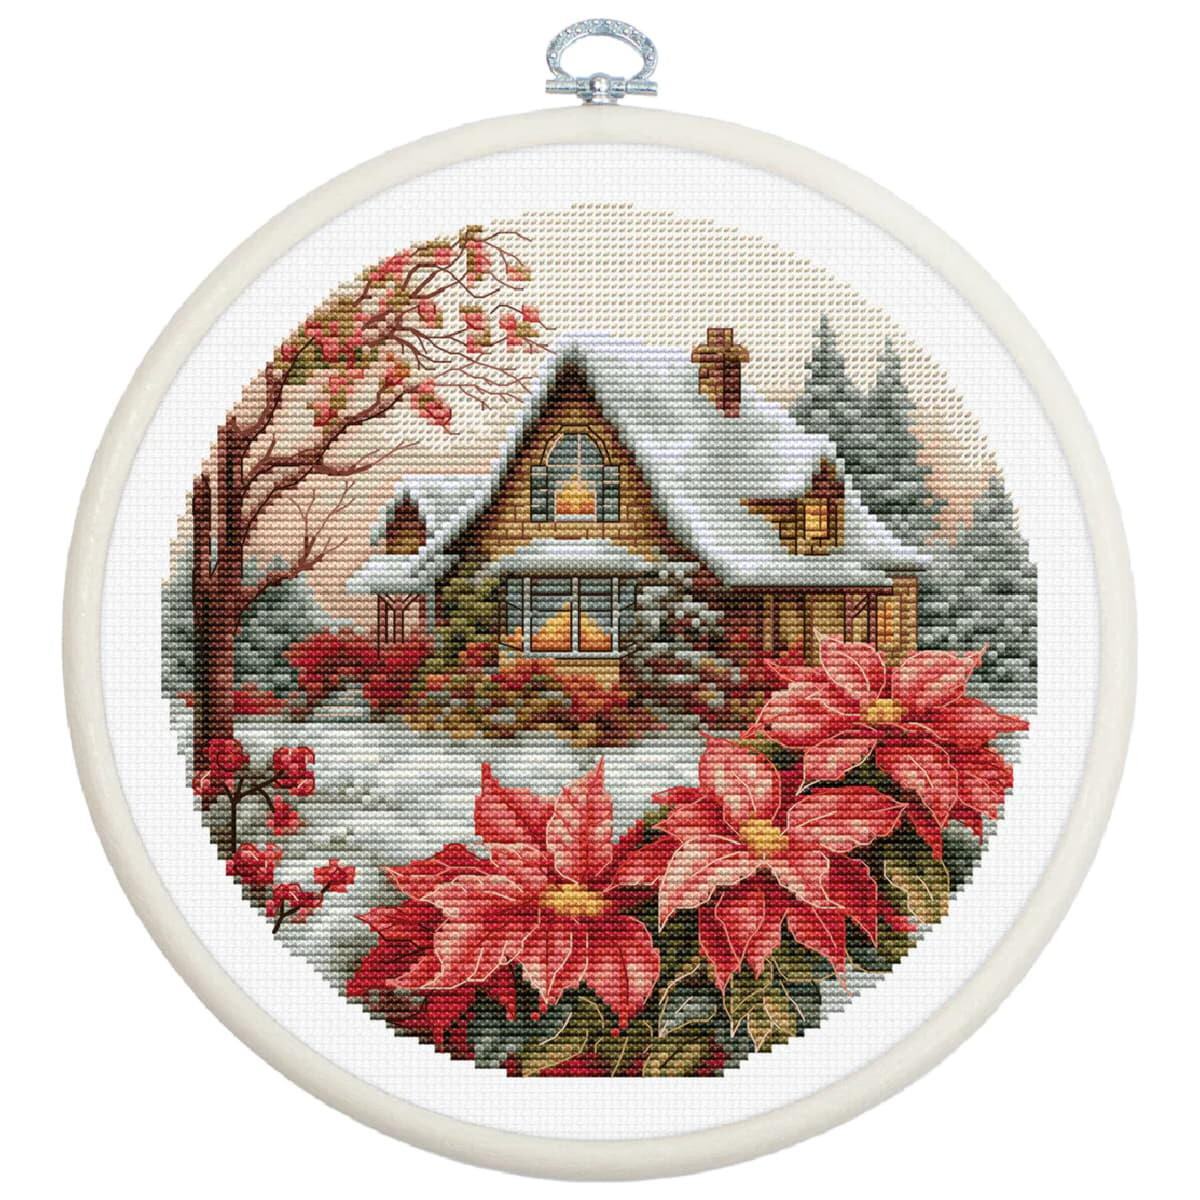 A cross-stitch embroidery from a Luca-s embroidery pack...